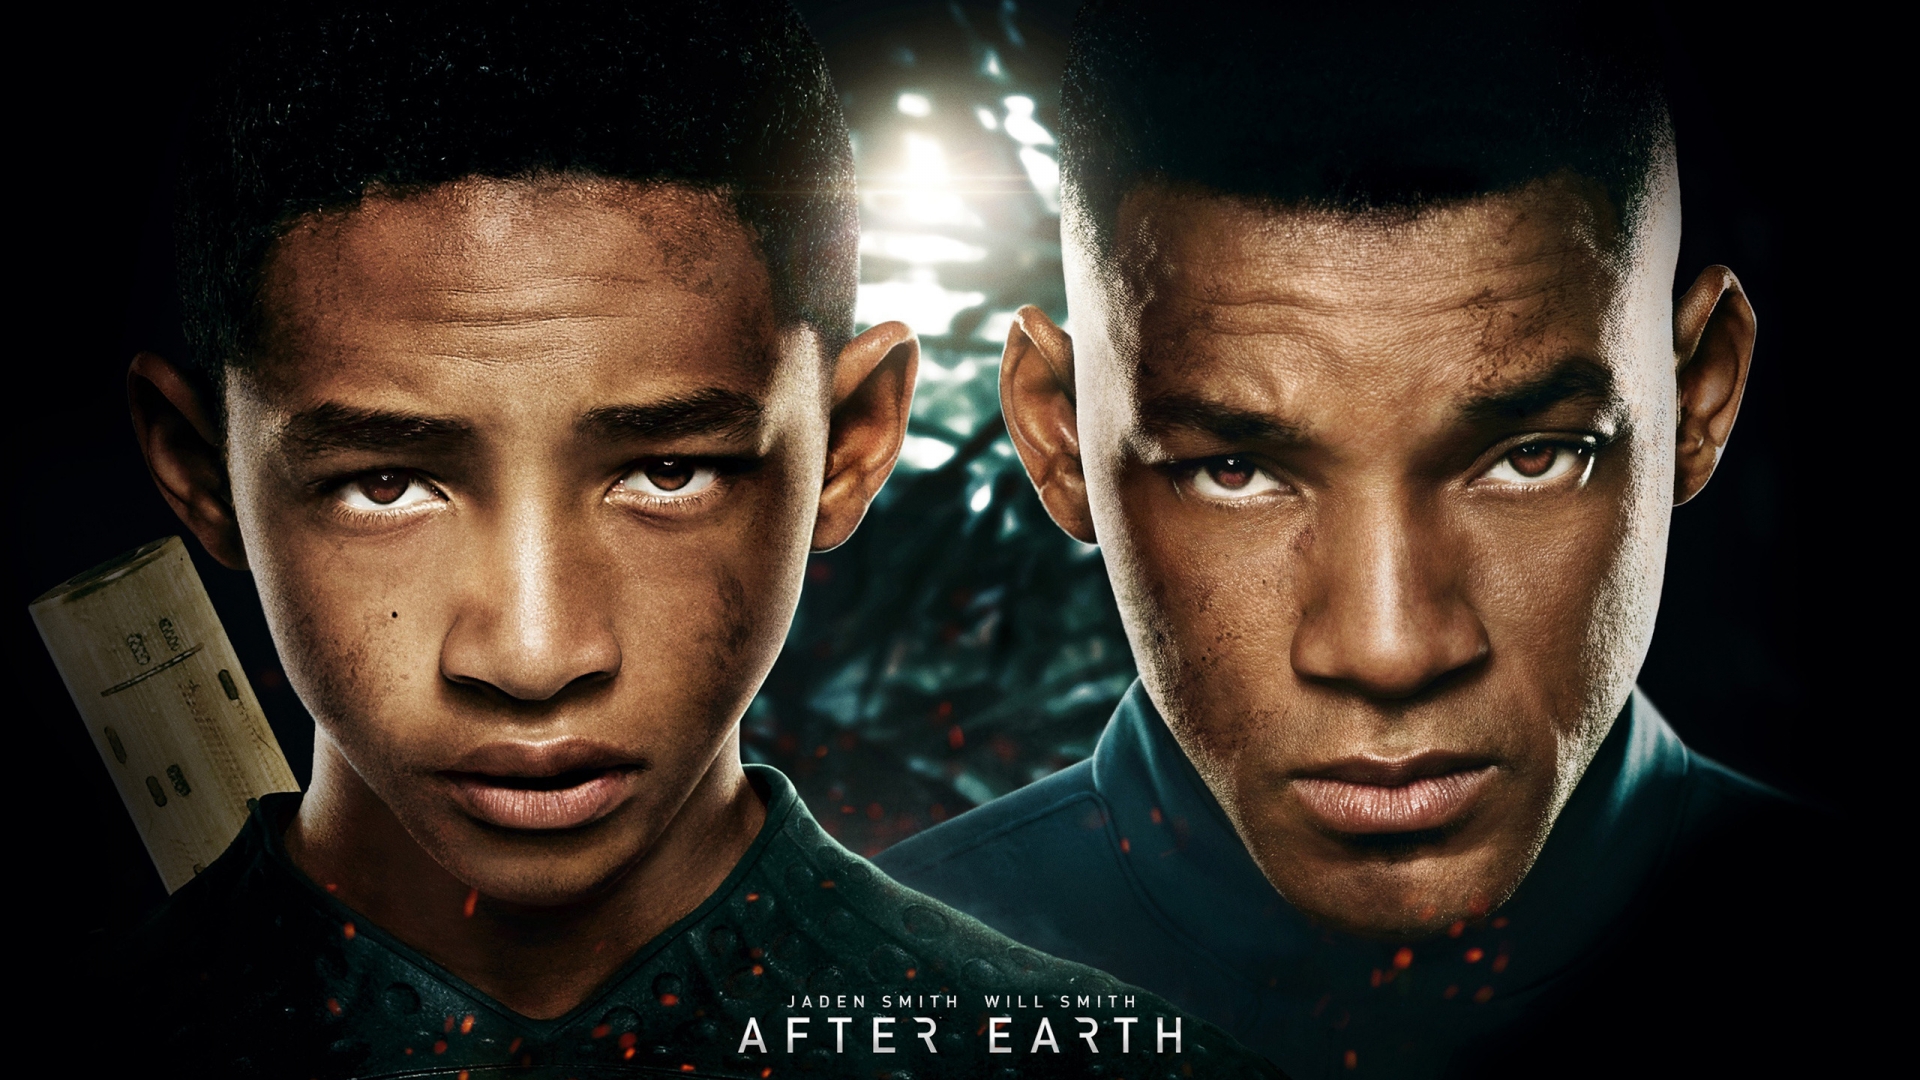 After Earth 2013 Movie for 1920 x 1080 HDTV 1080p resolution